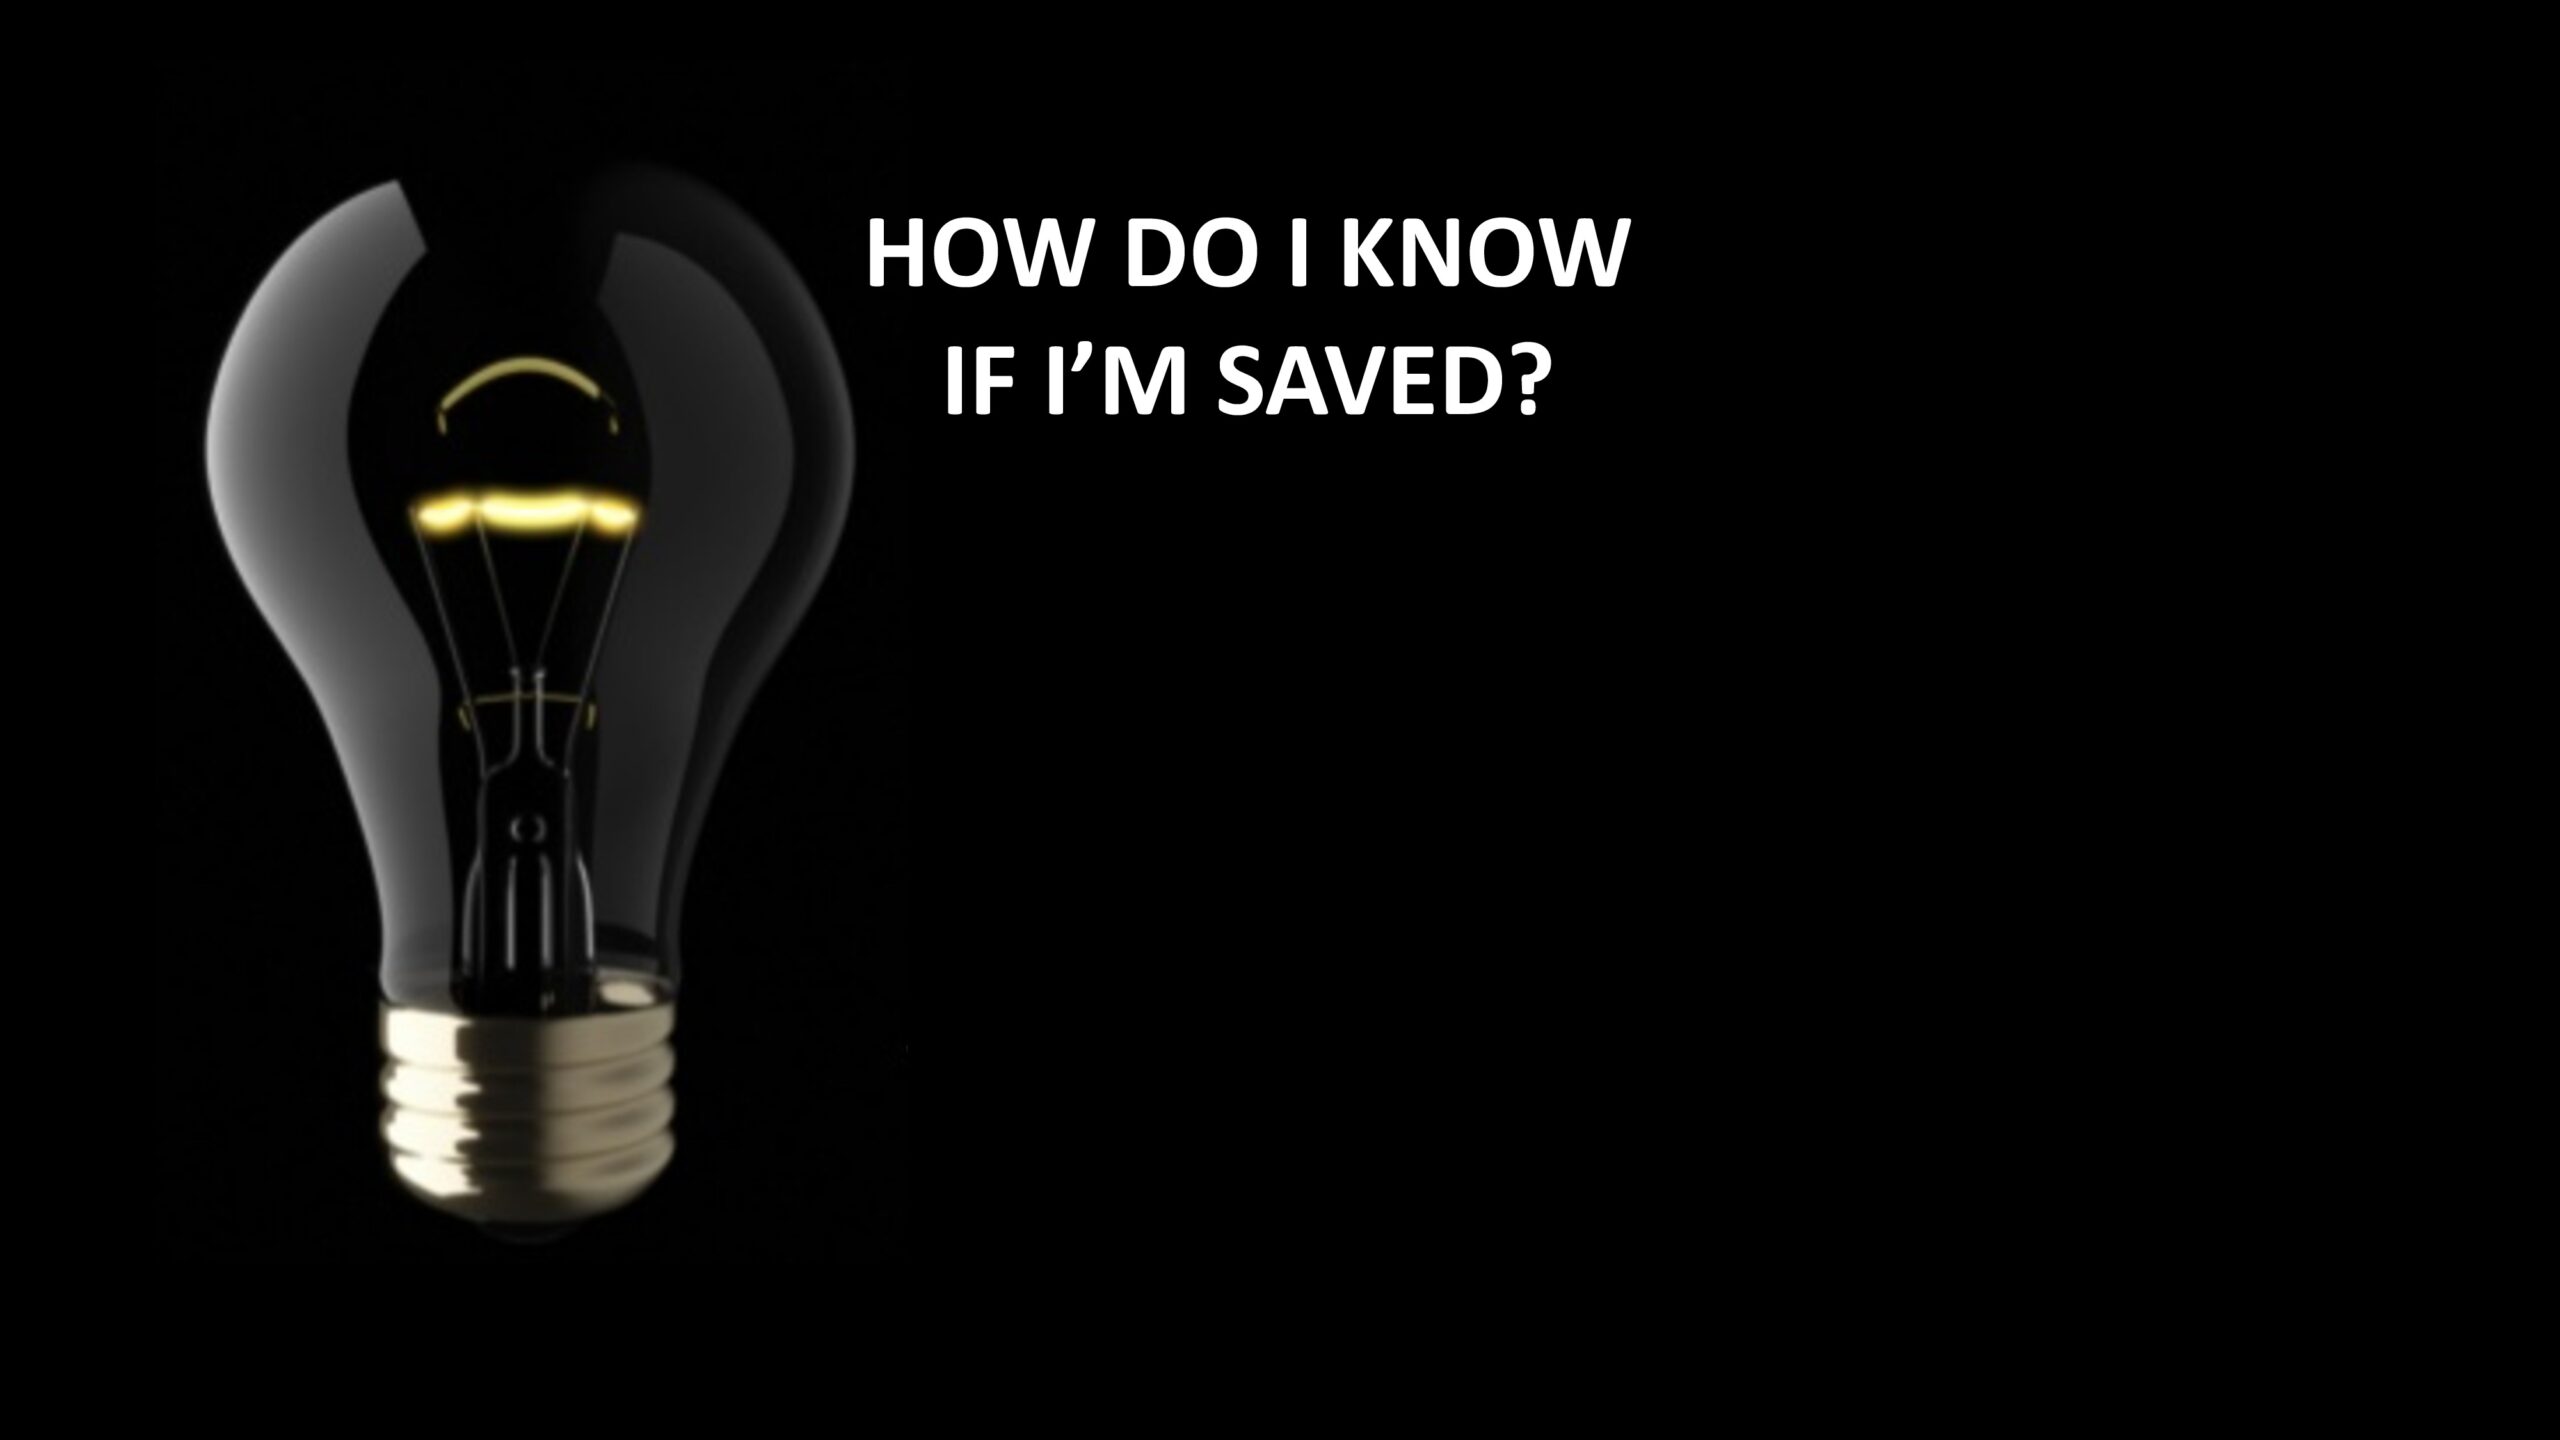 How Do I Know If I’m Saved? (a 1-minute video)